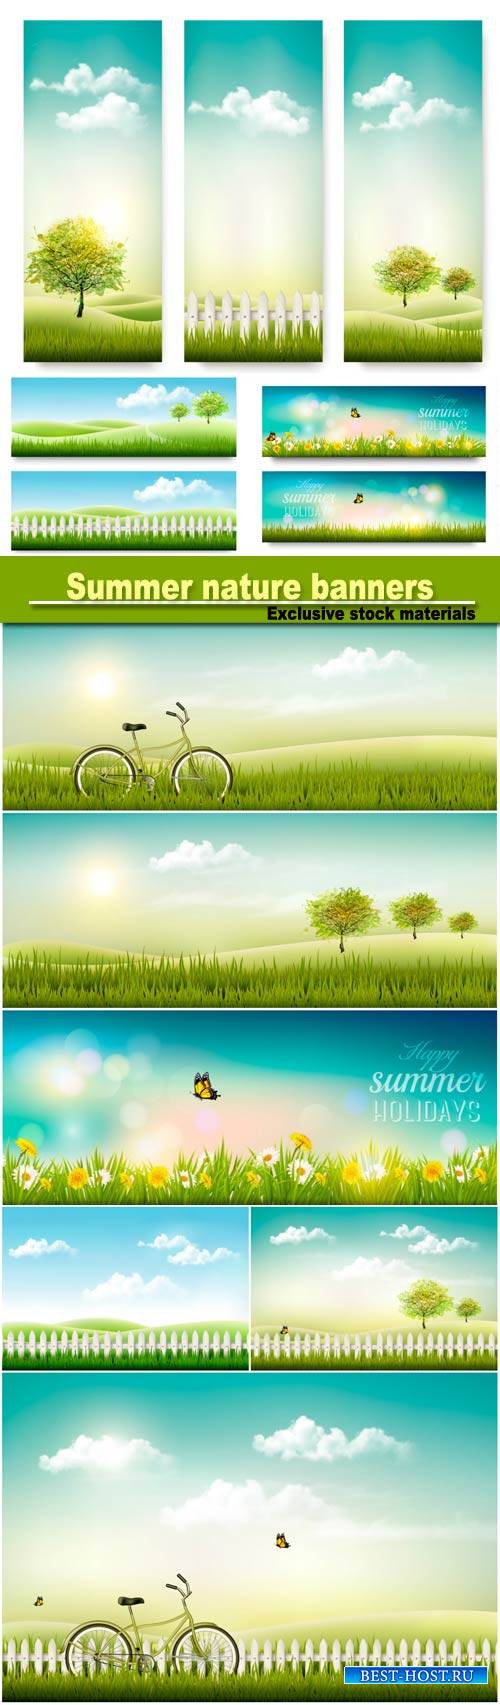 Summer nature banners with green trees and sun